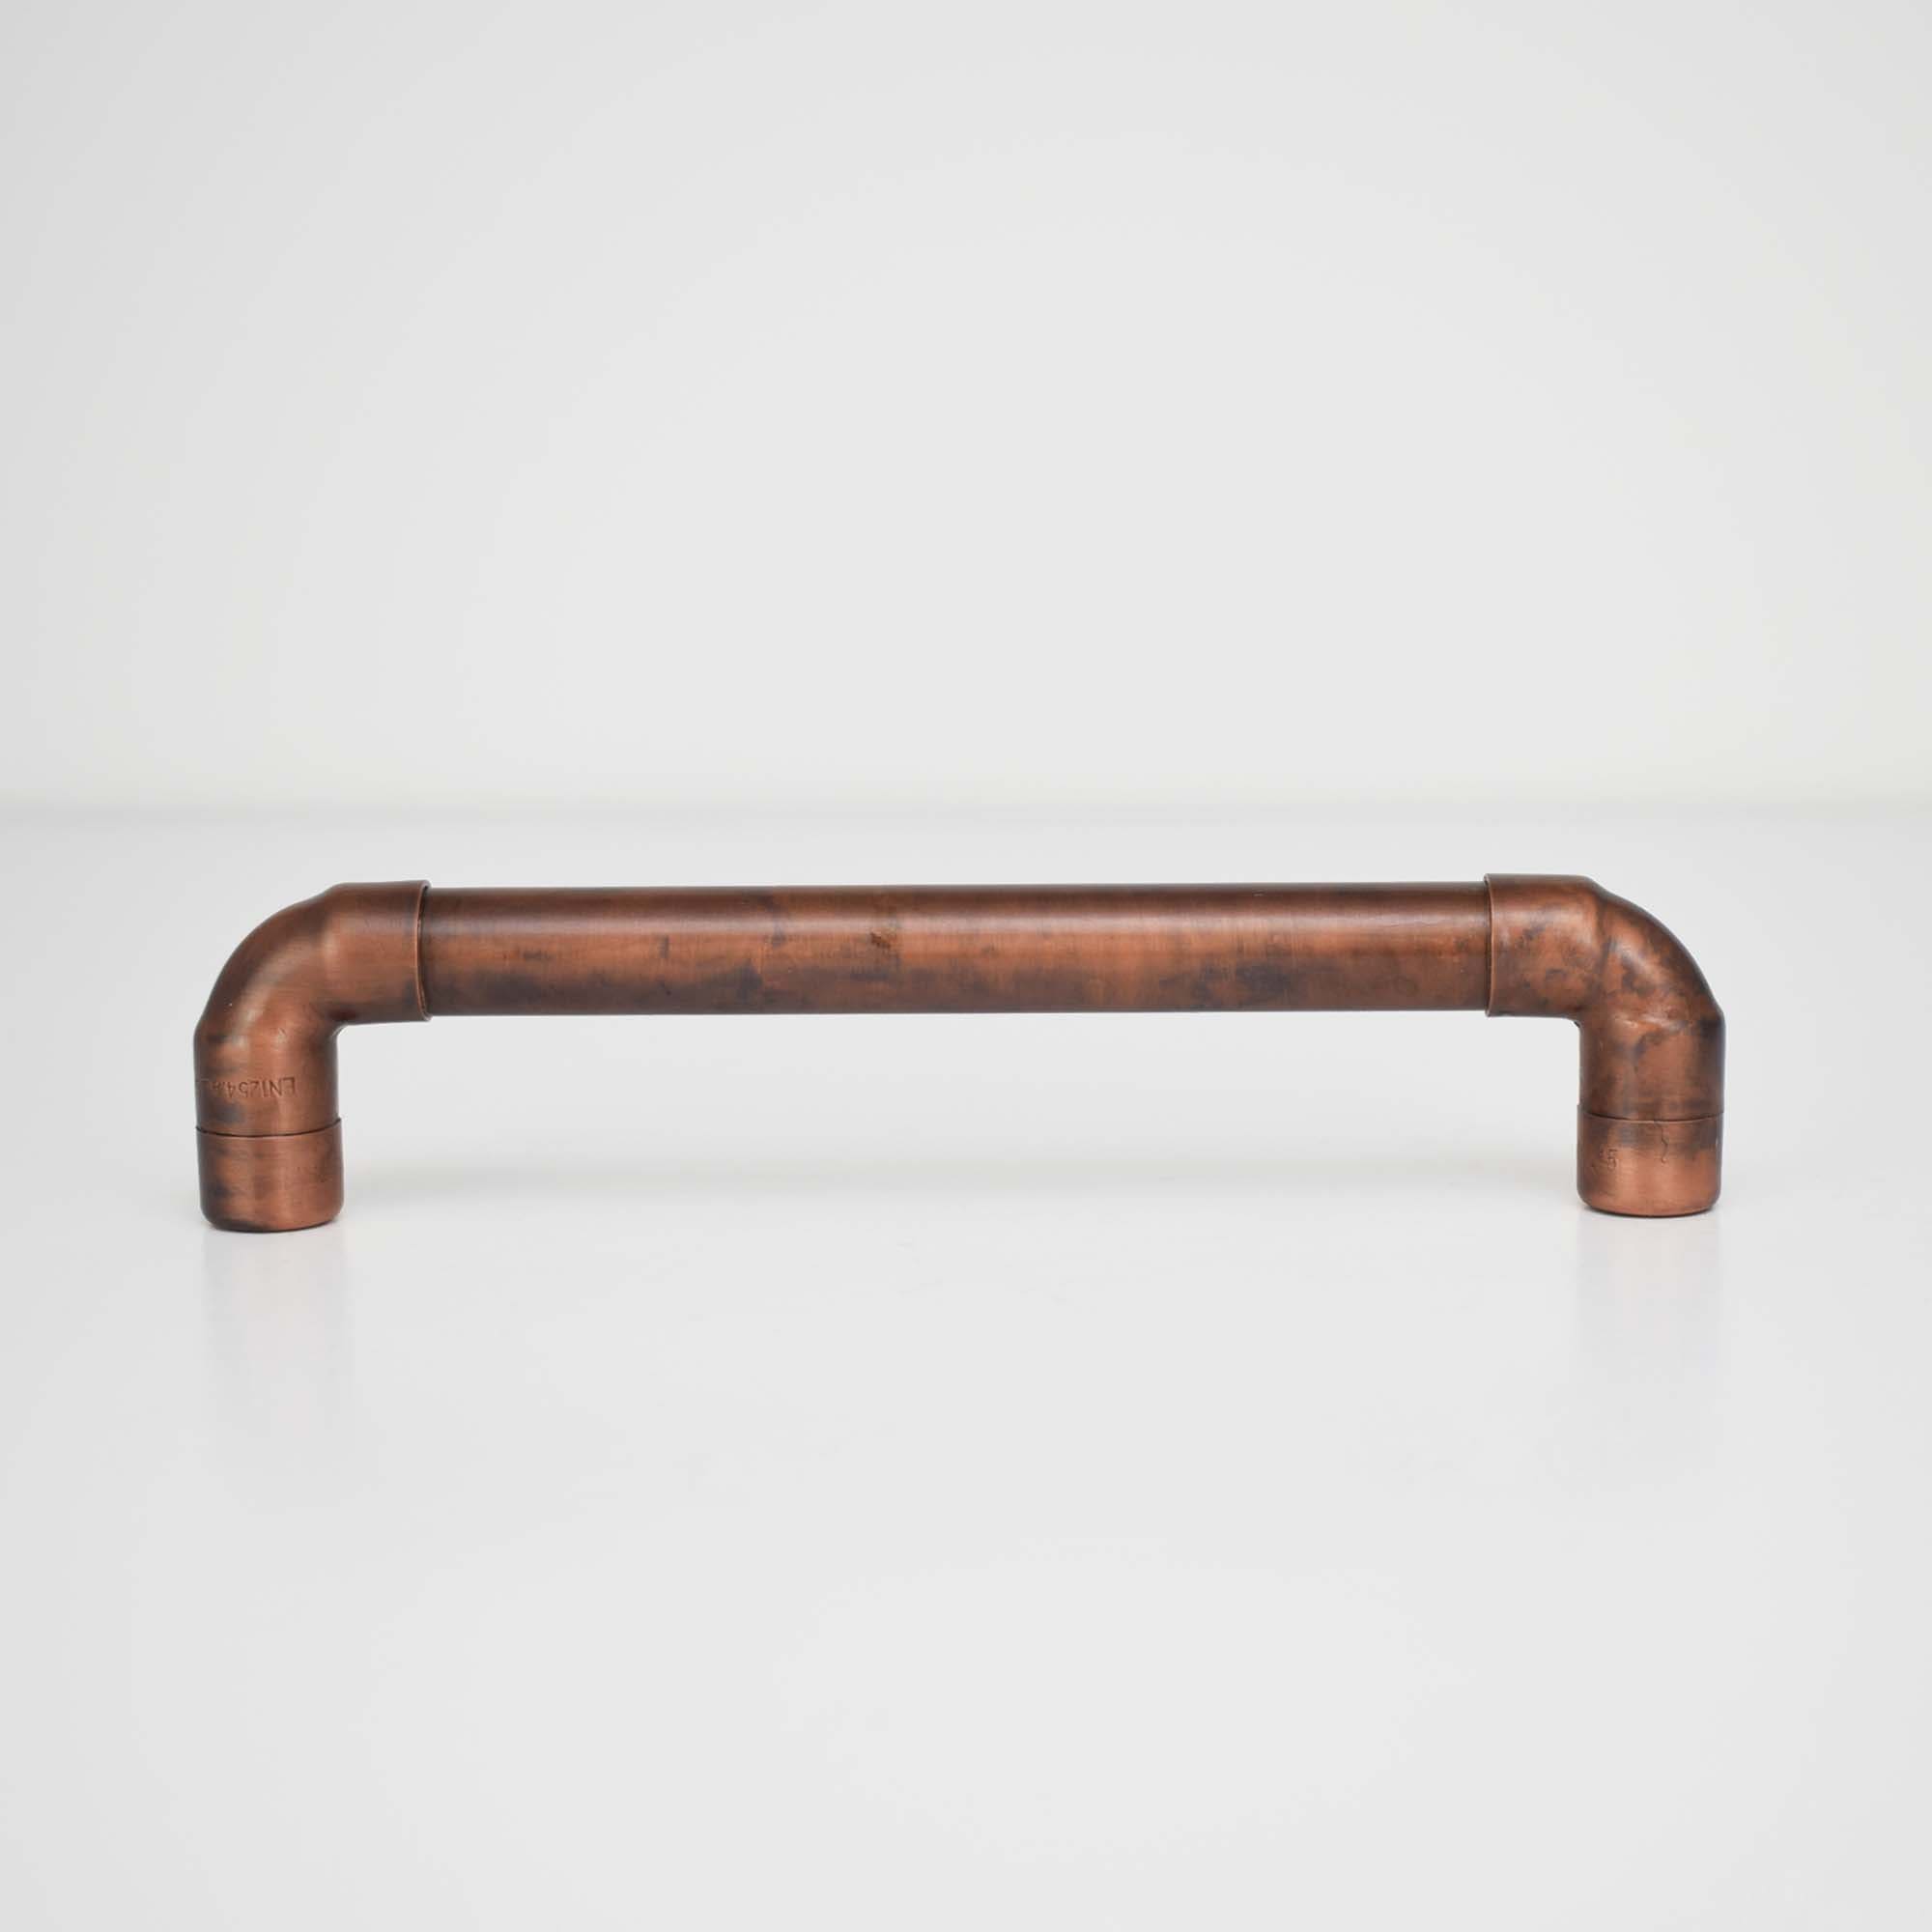 Aged Copper U-Pull Handle - White Background